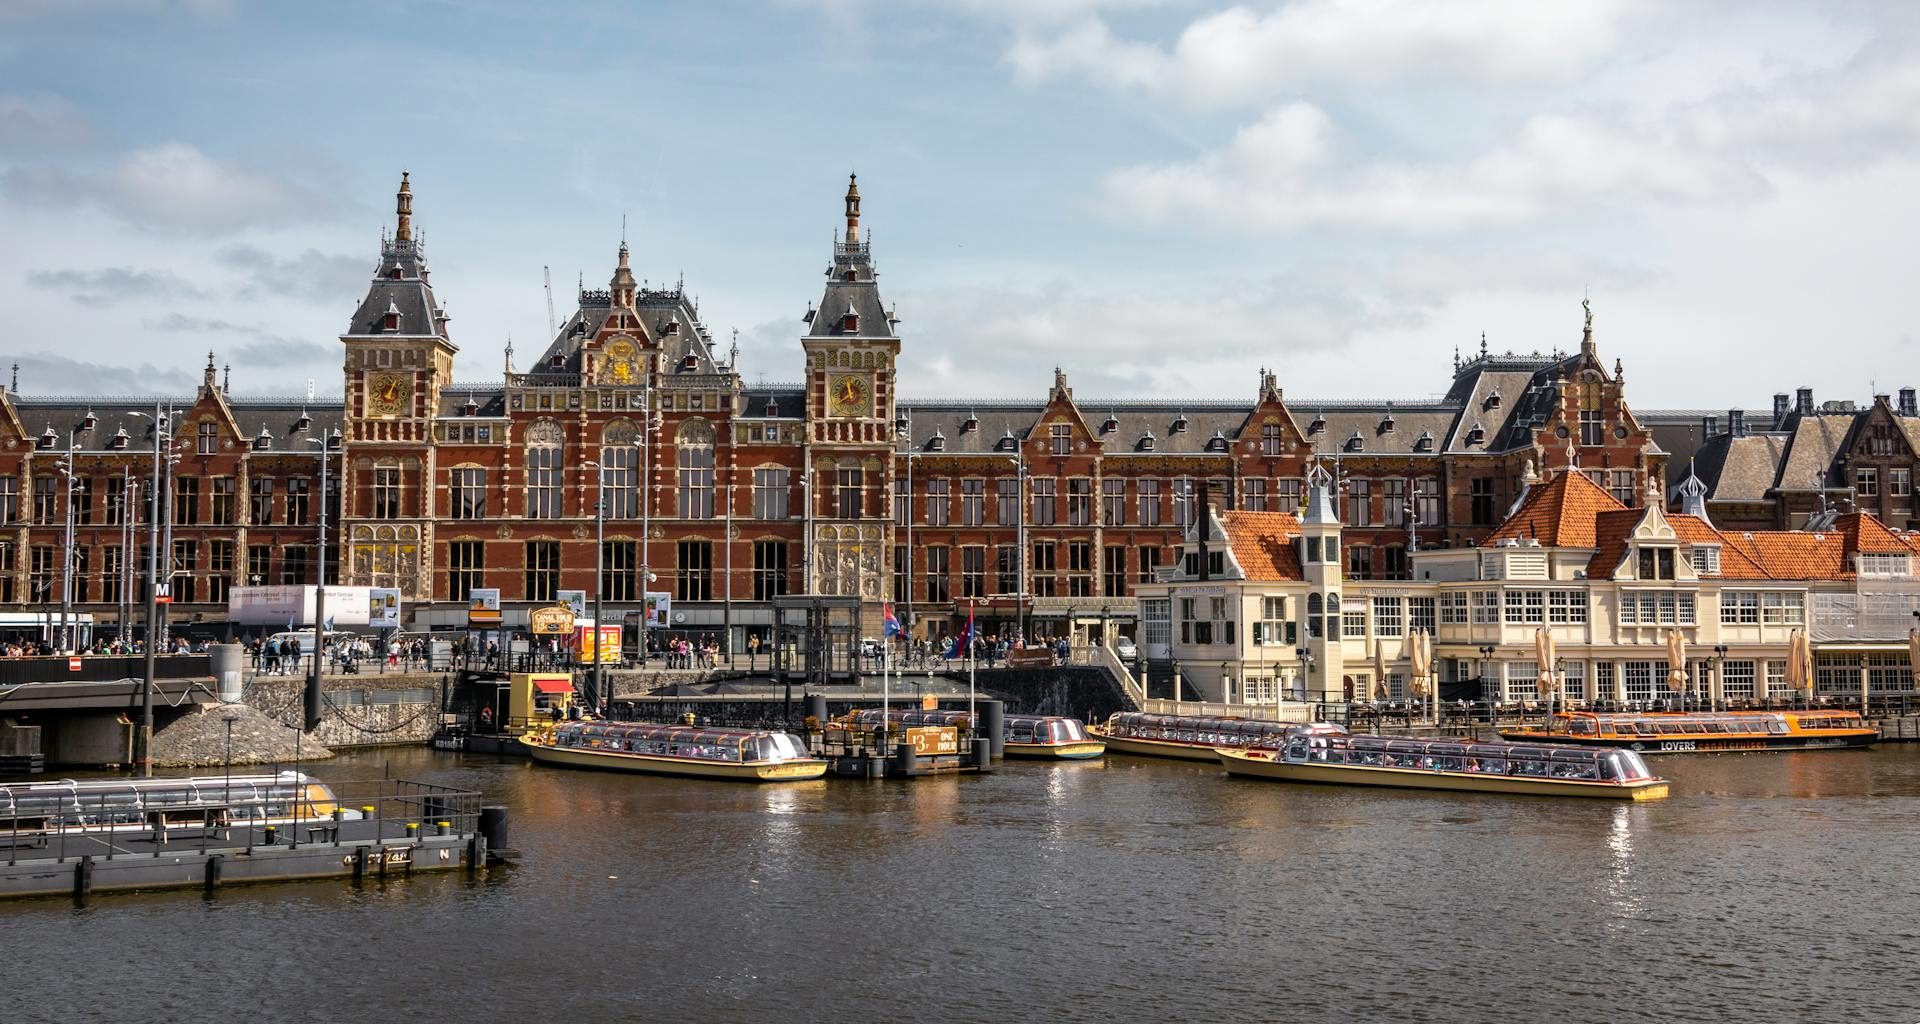 The impressive Amsterdam Centraal railway station with its neo-Renaissance architecture and bustling platforms.